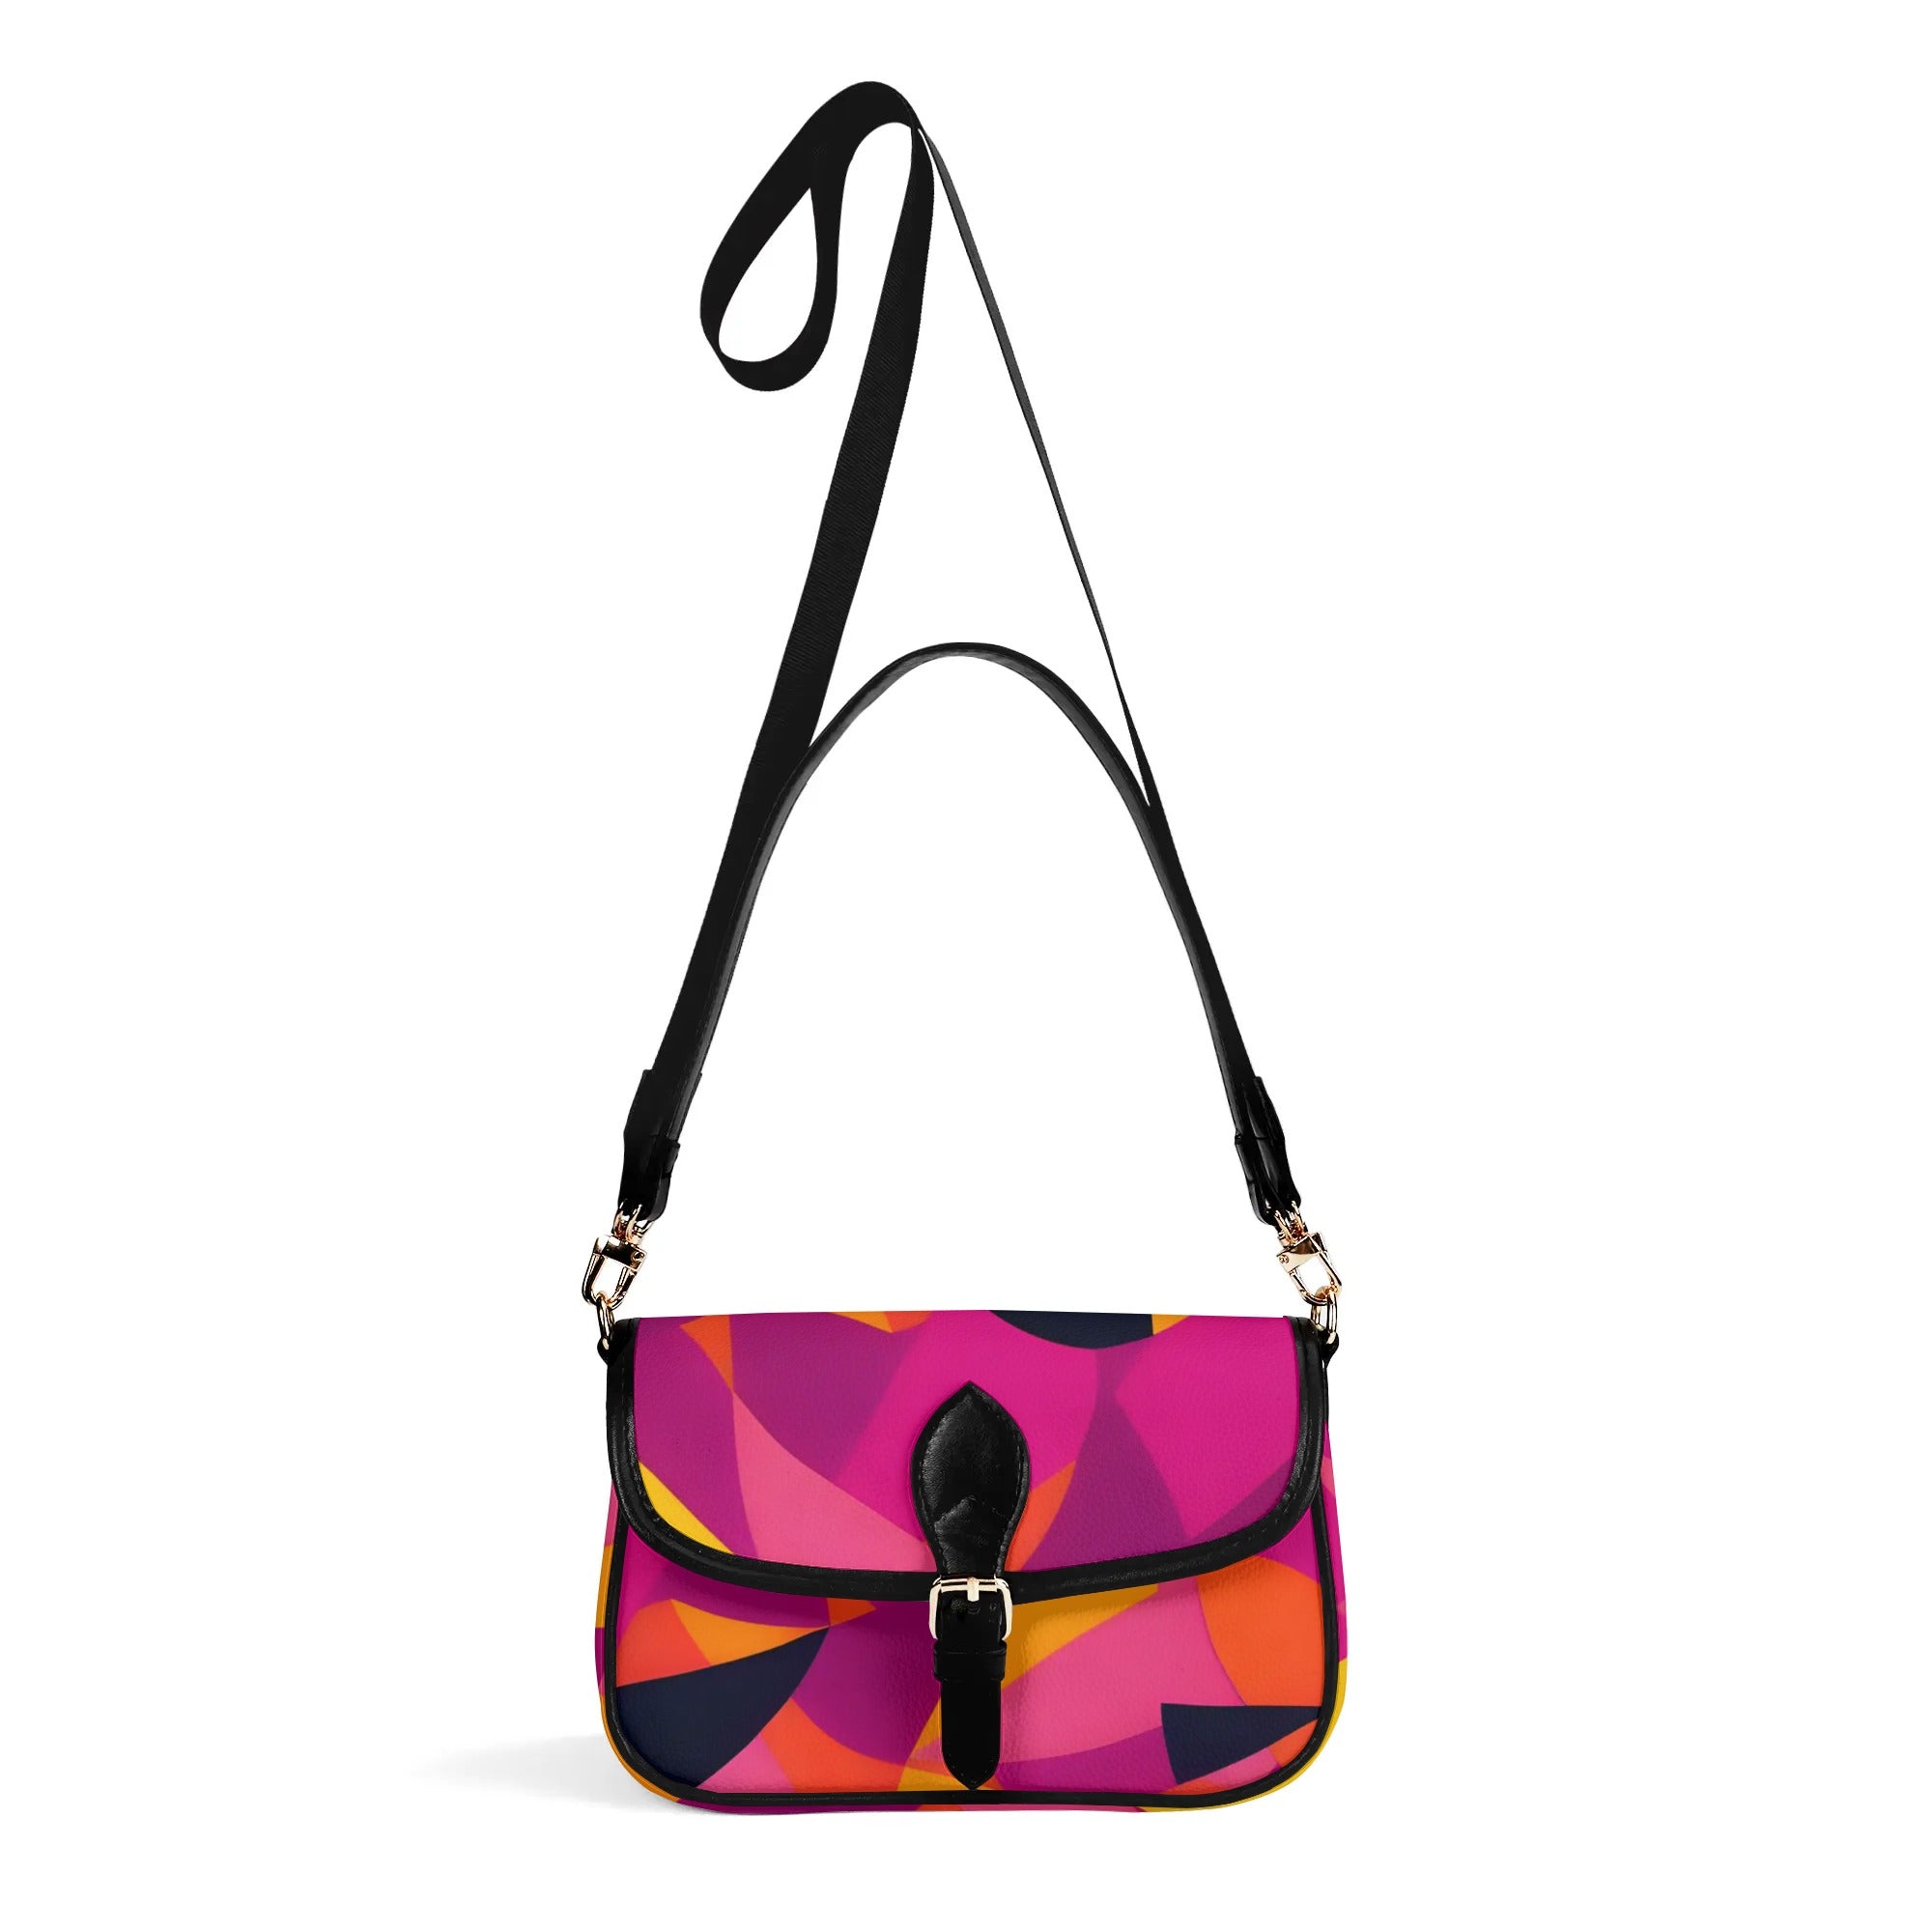 Vibrant pink and orange geometric patterned shoulder bag with black strap - fashion accessory for women